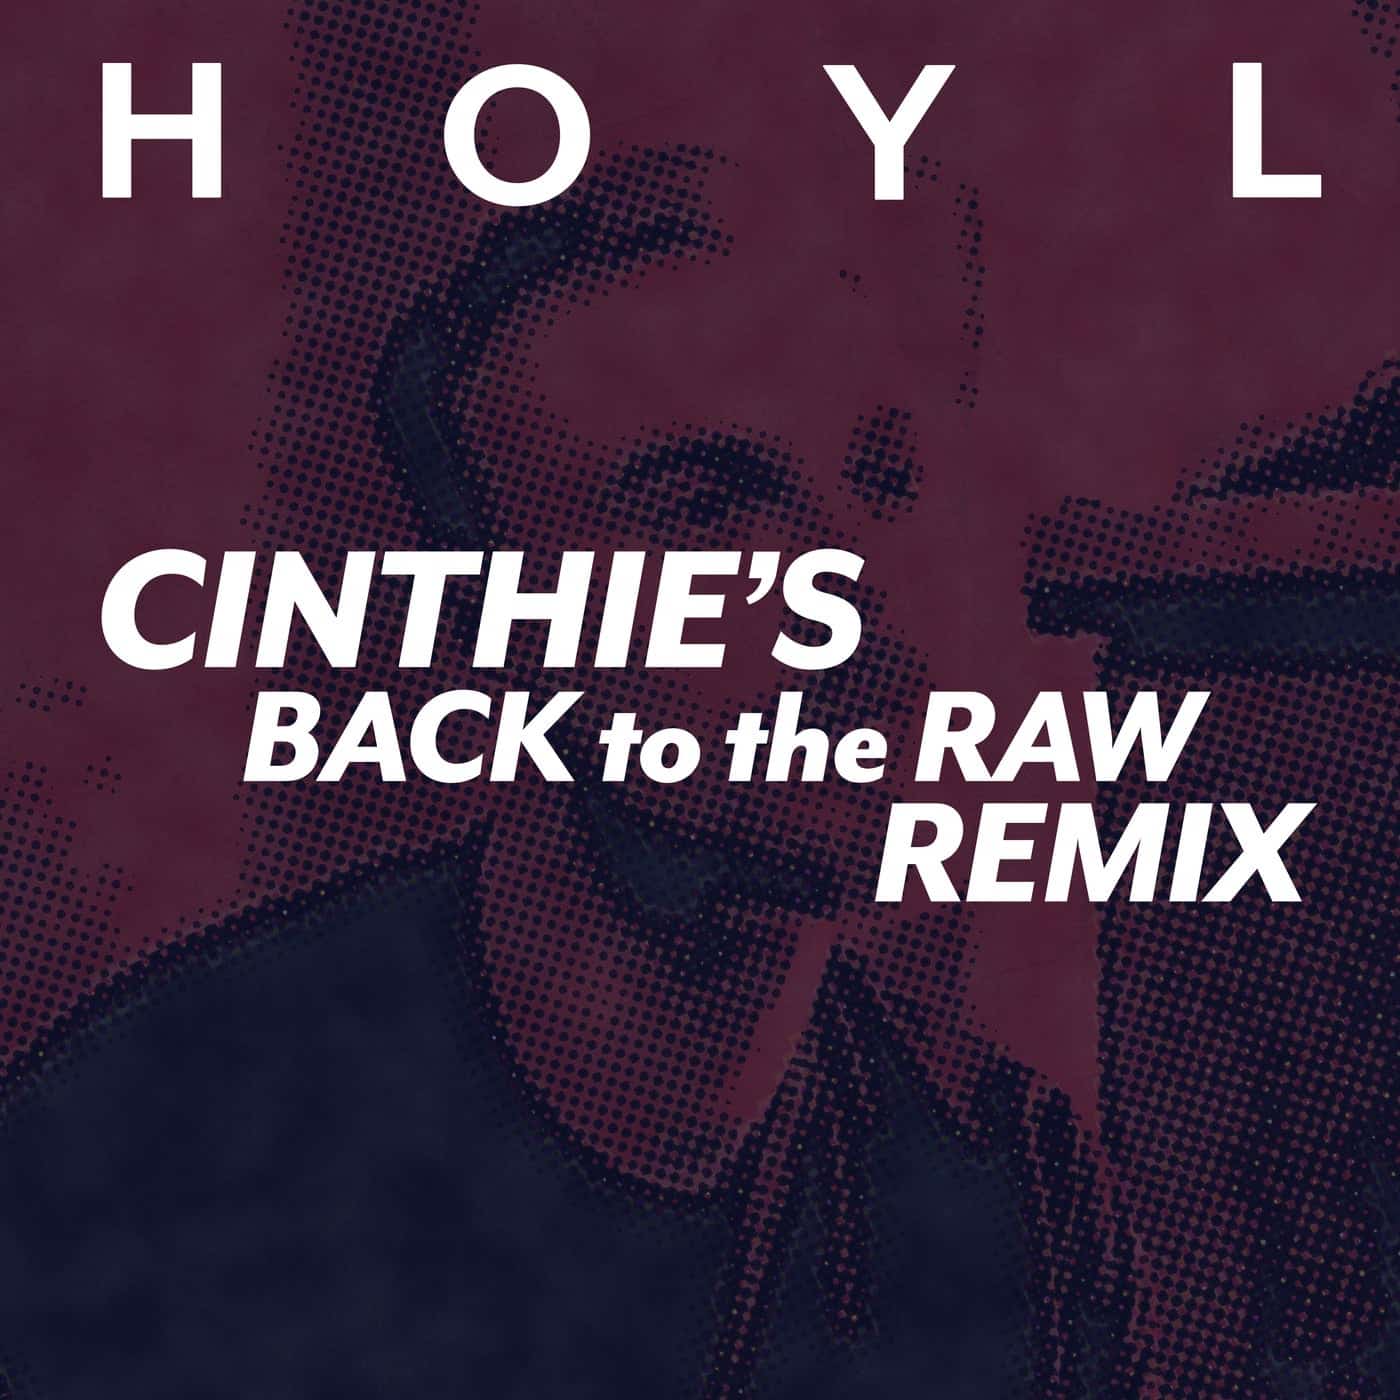 image cover: Lukas Lyrestam - H.O.Y.L. (High On Your Love) [CINTHIE's Back to the Raw Remix]